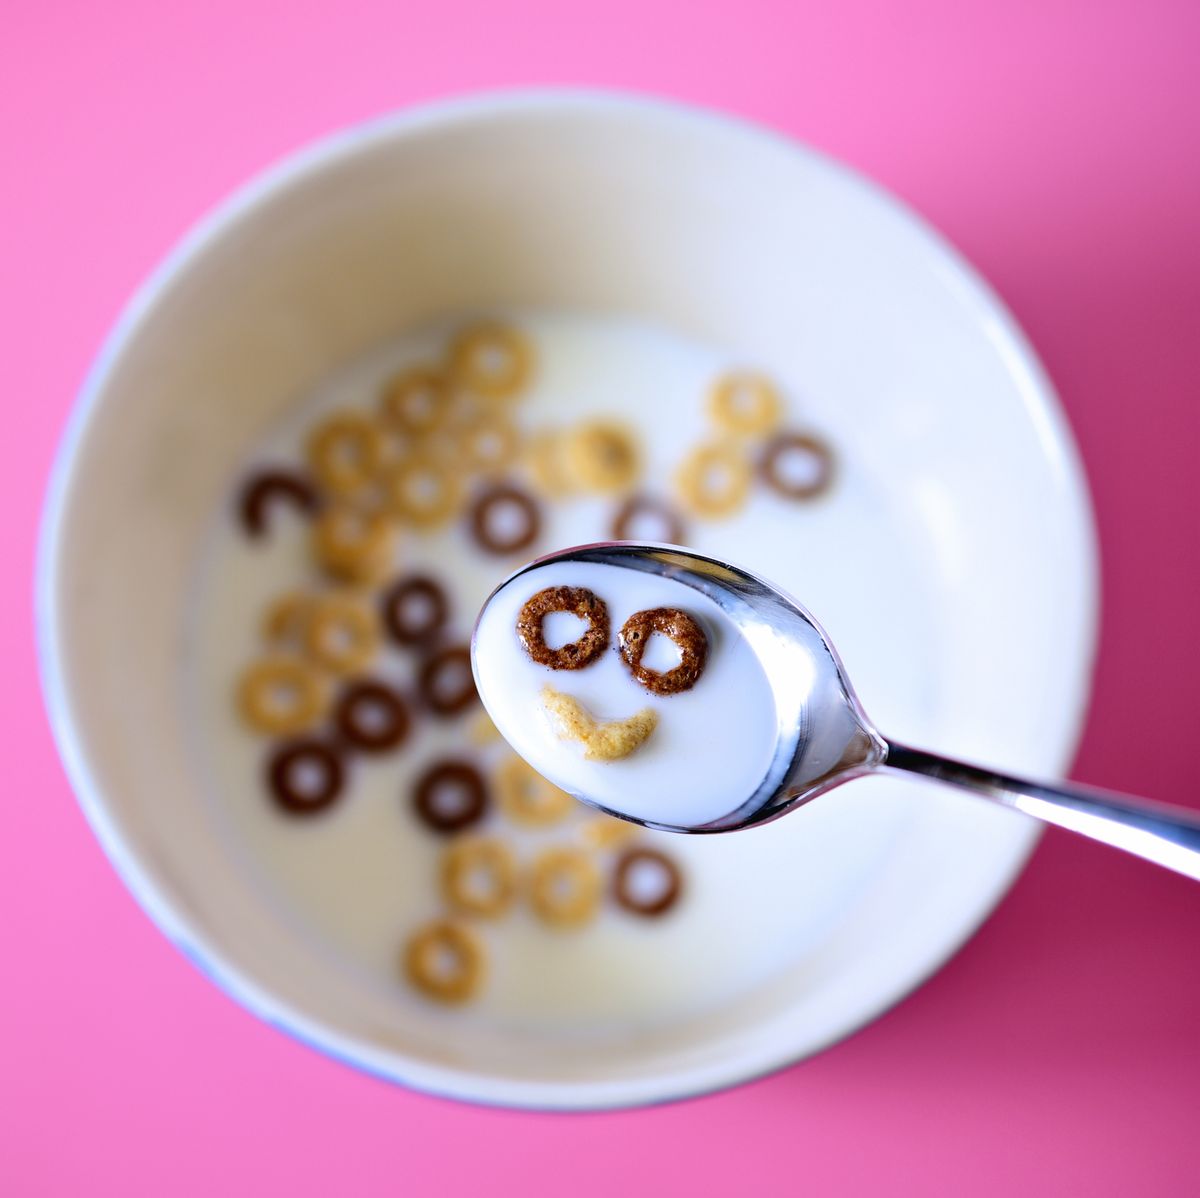 Cereal face